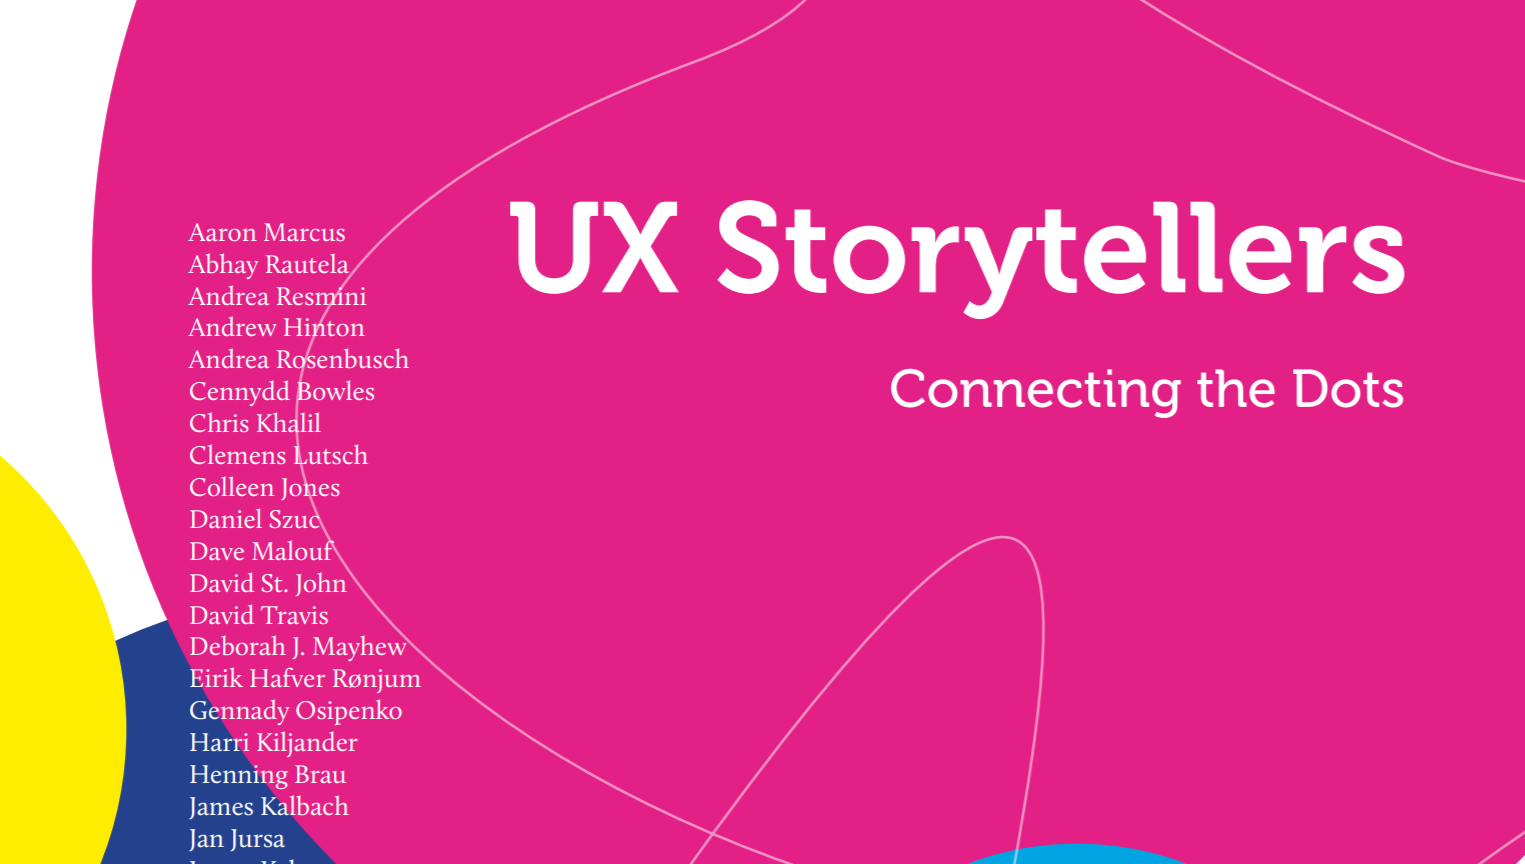 My chapter in the book: UX Storytellers – Connecting the Dots